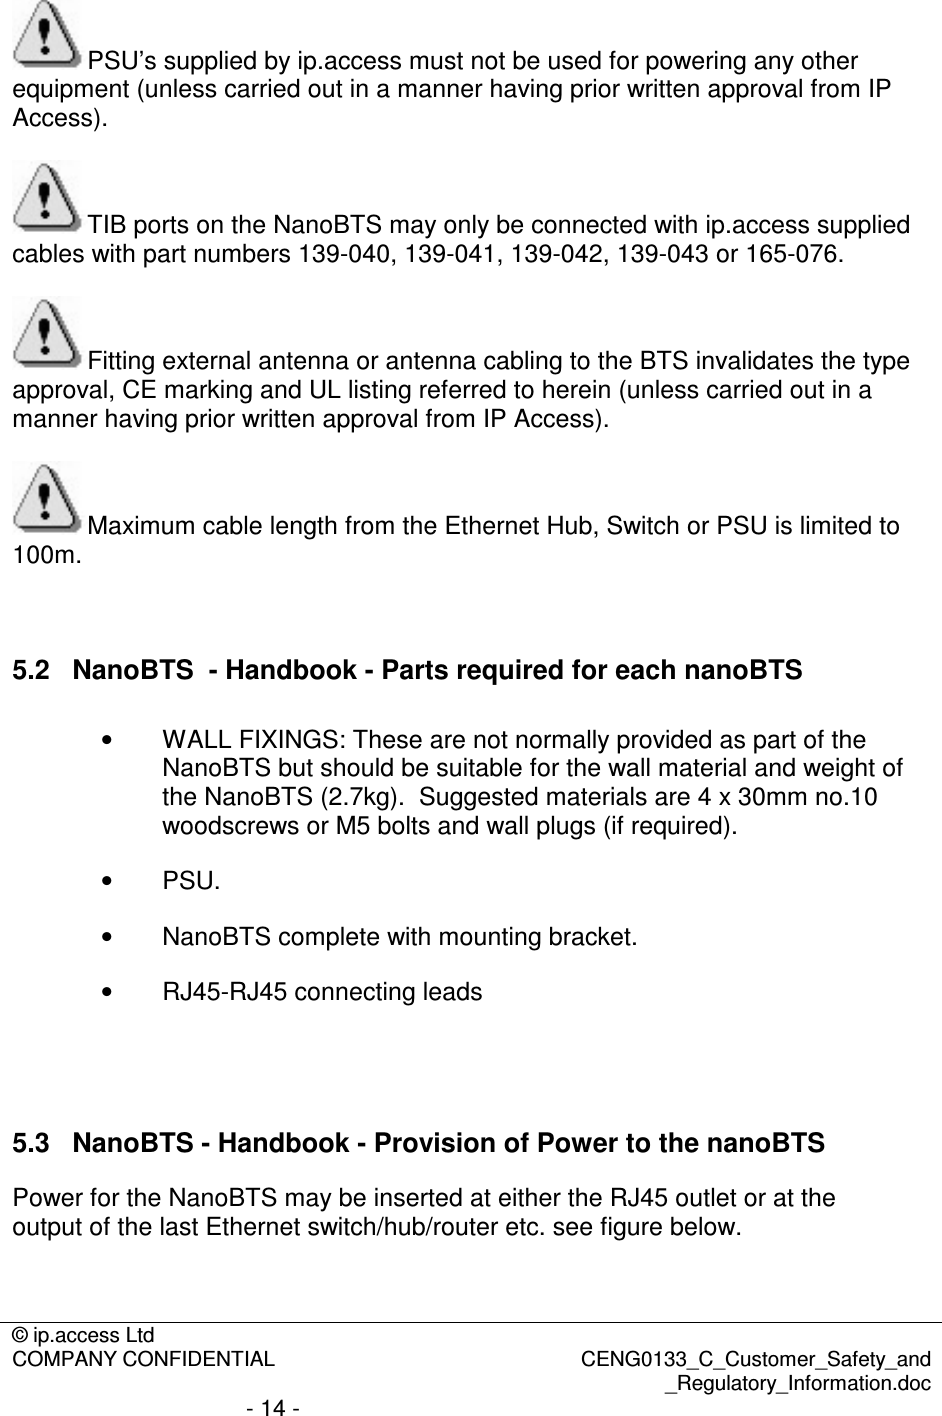 © ip.access Ltd  COMPANY CONFIDENTIAL  CENG0133_C_Customer_Safety_and _Regulatory_Information.doc - 14 -  PSU’s supplied by ip.access must not be used for powering any other equipment (unless carried out in a manner having prior written approval from IP Access).  TIB ports on the NanoBTS may only be connected with ip.access supplied cables with part numbers 139-040, 139-041, 139-042, 139-043 or 165-076.  Fitting external antenna or antenna cabling to the BTS invalidates the type approval, CE marking and UL listing referred to herein (unless carried out in a manner having prior written approval from IP Access).  Maximum cable length from the Ethernet Hub, Switch or PSU is limited to 100m.  5.2  NanoBTS  - Handbook - Parts required for each nanoBTS •  WALL FIXINGS: These are not normally provided as part of the NanoBTS but should be suitable for the wall material and weight of the NanoBTS (2.7kg).  Suggested materials are 4 x 30mm no.10 woodscrews or M5 bolts and wall plugs (if required).  •  PSU. •  NanoBTS complete with mounting bracket. •  RJ45-RJ45 connecting leads   5.3  NanoBTS - Handbook - Provision of Power to the nanoBTS Power for the NanoBTS may be inserted at either the RJ45 outlet or at the output of the last Ethernet switch/hub/router etc. see figure below. 